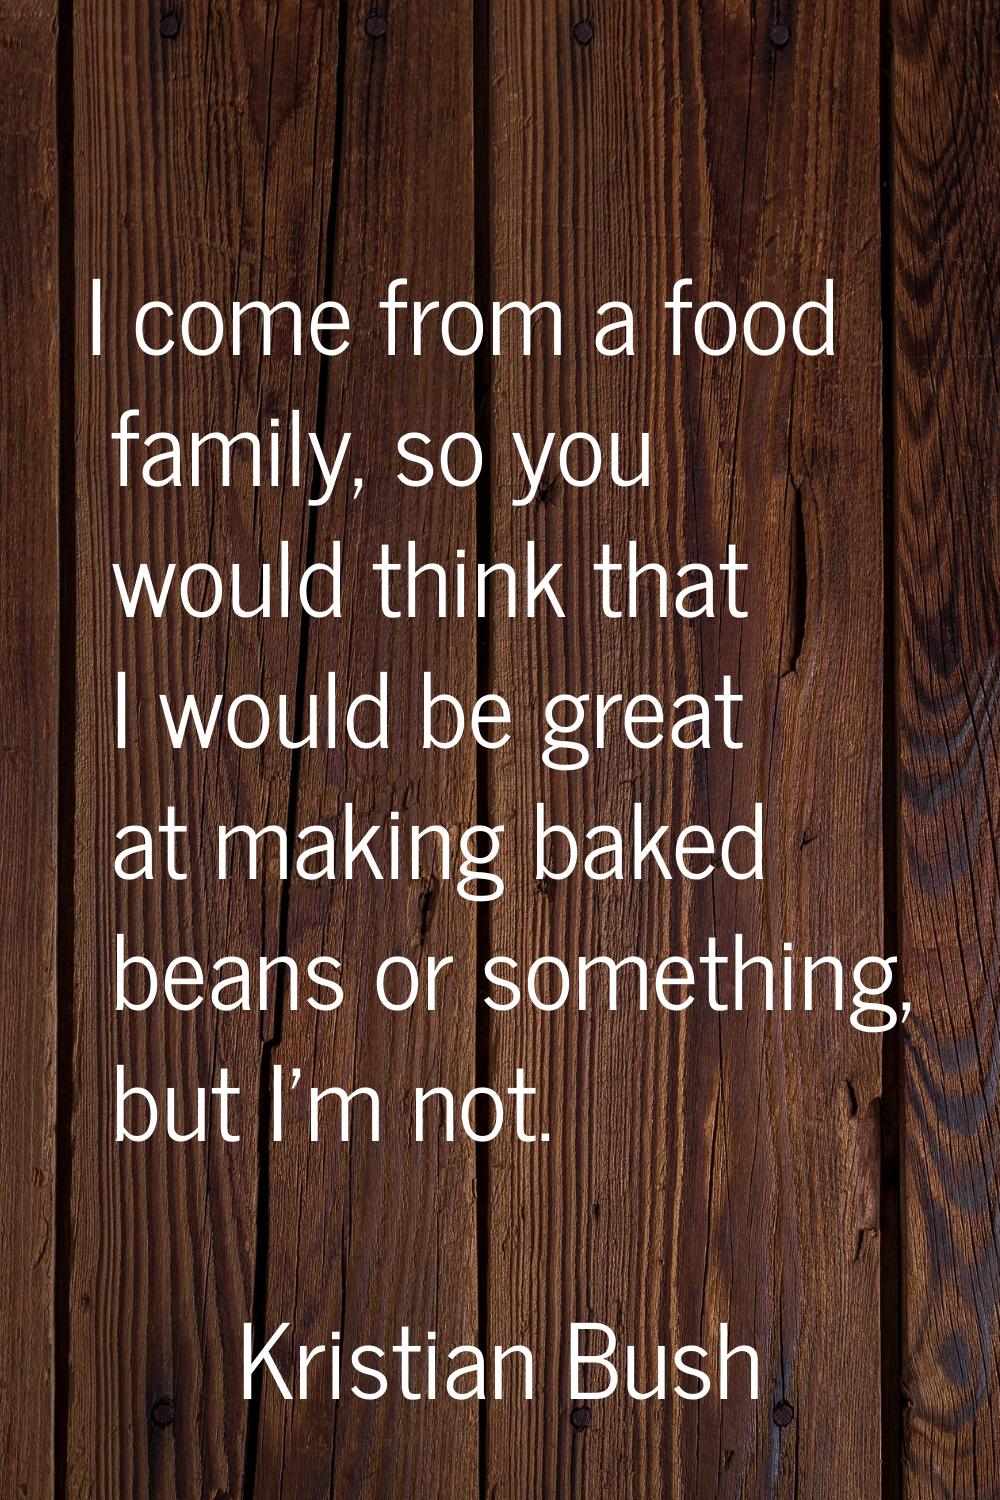 I come from a food family, so you would think that I would be great at making baked beans or someth